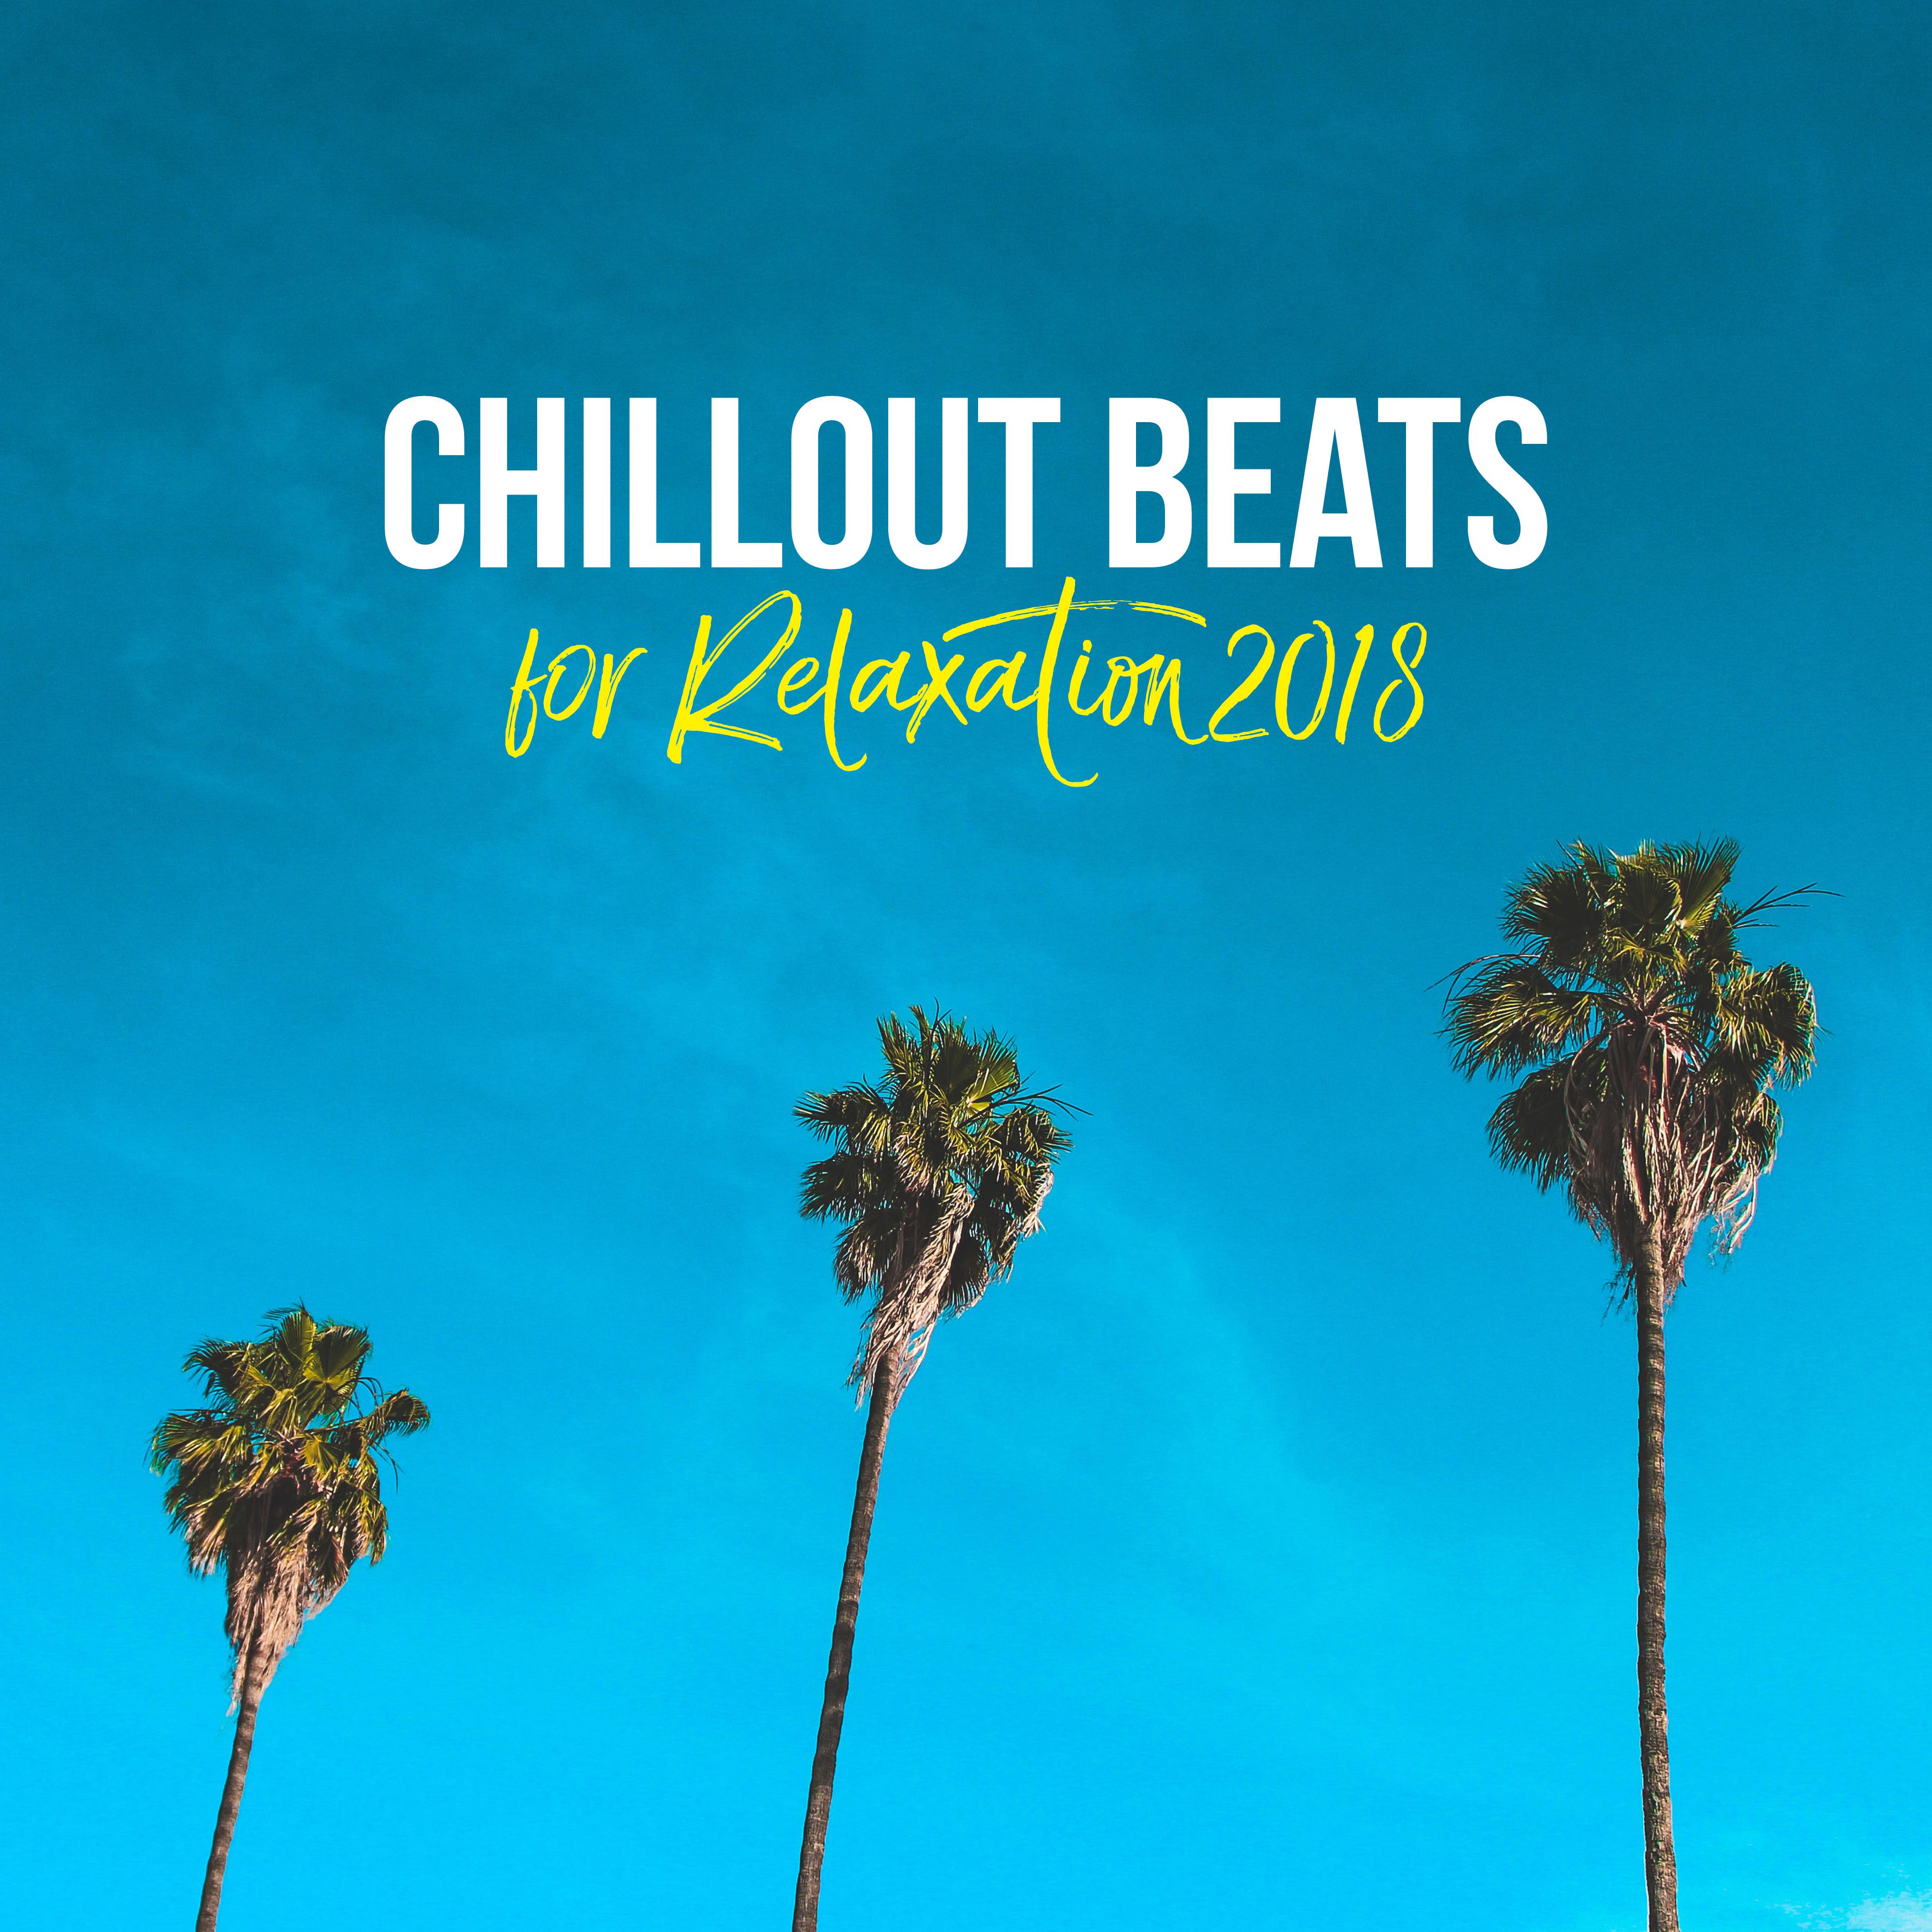 Chillout Beats for Relaxation 2018